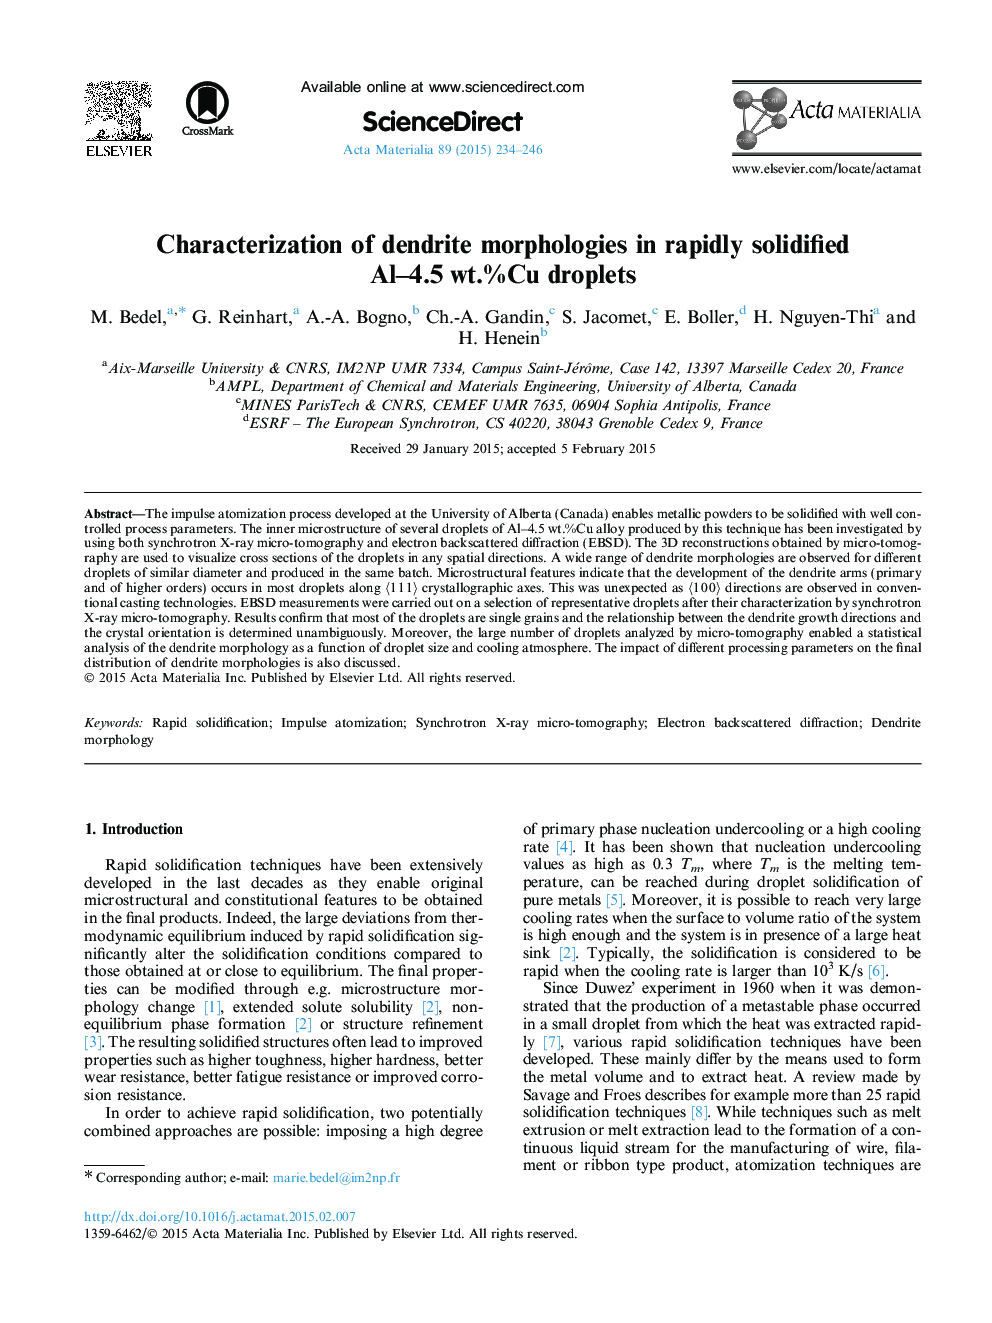 Characterization of dendrite morphologies in rapidly solidified Al-4.5Â wt.%Cu droplets